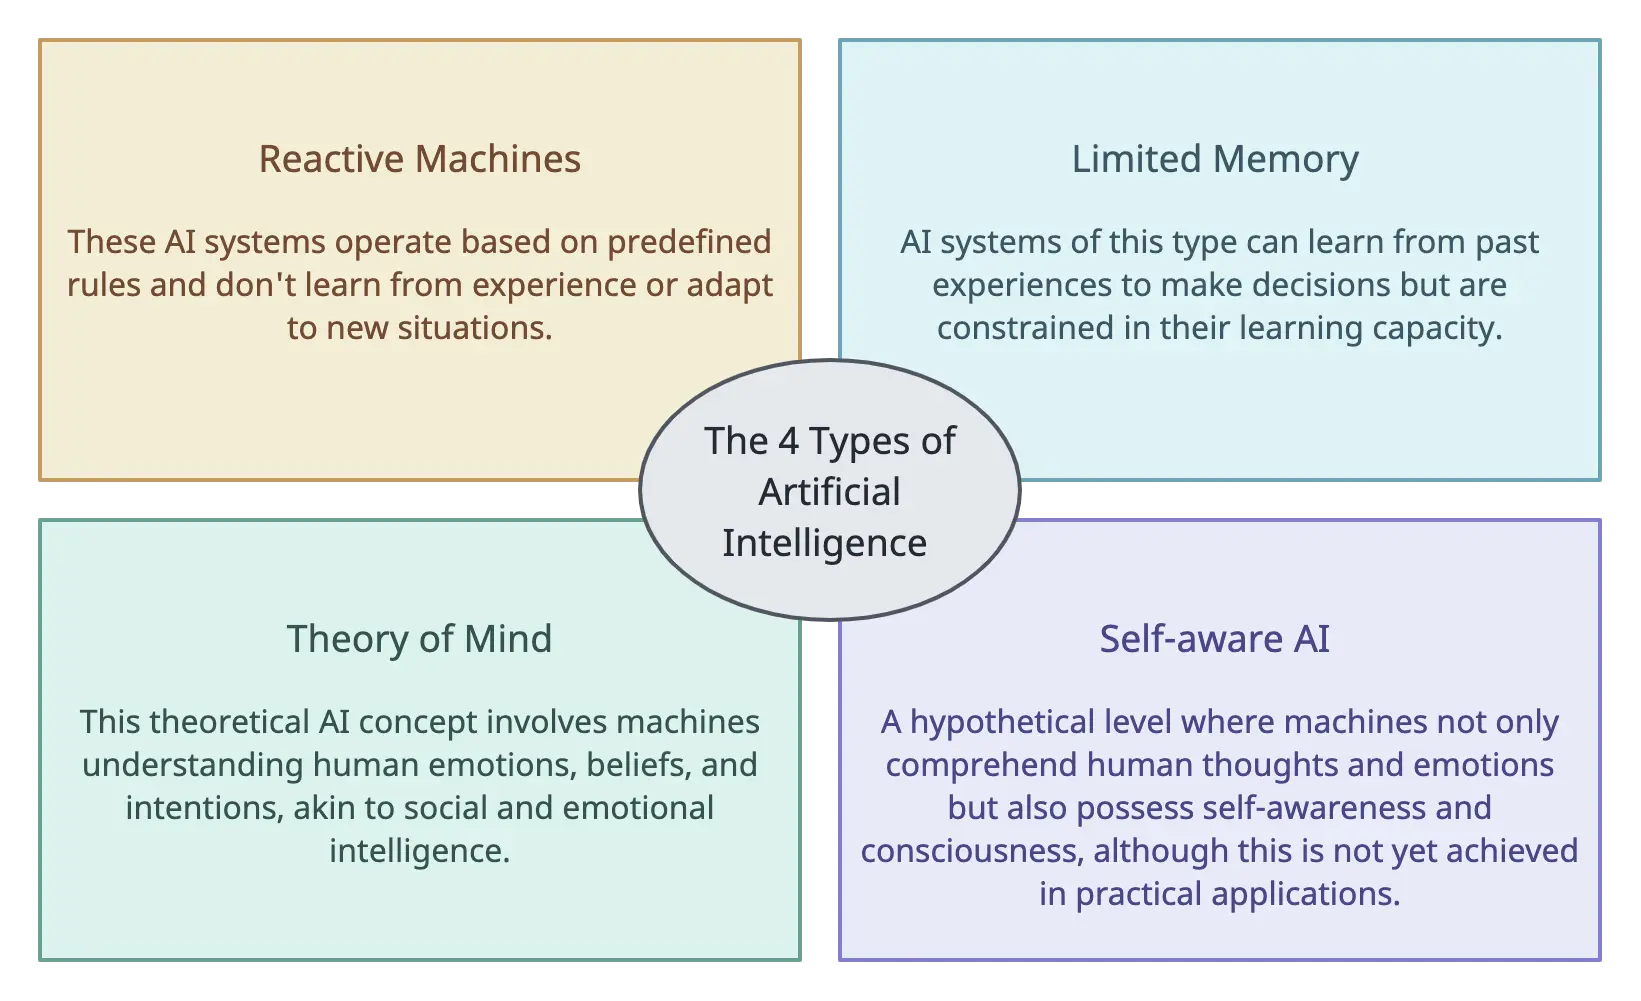 The 4 Types of AI